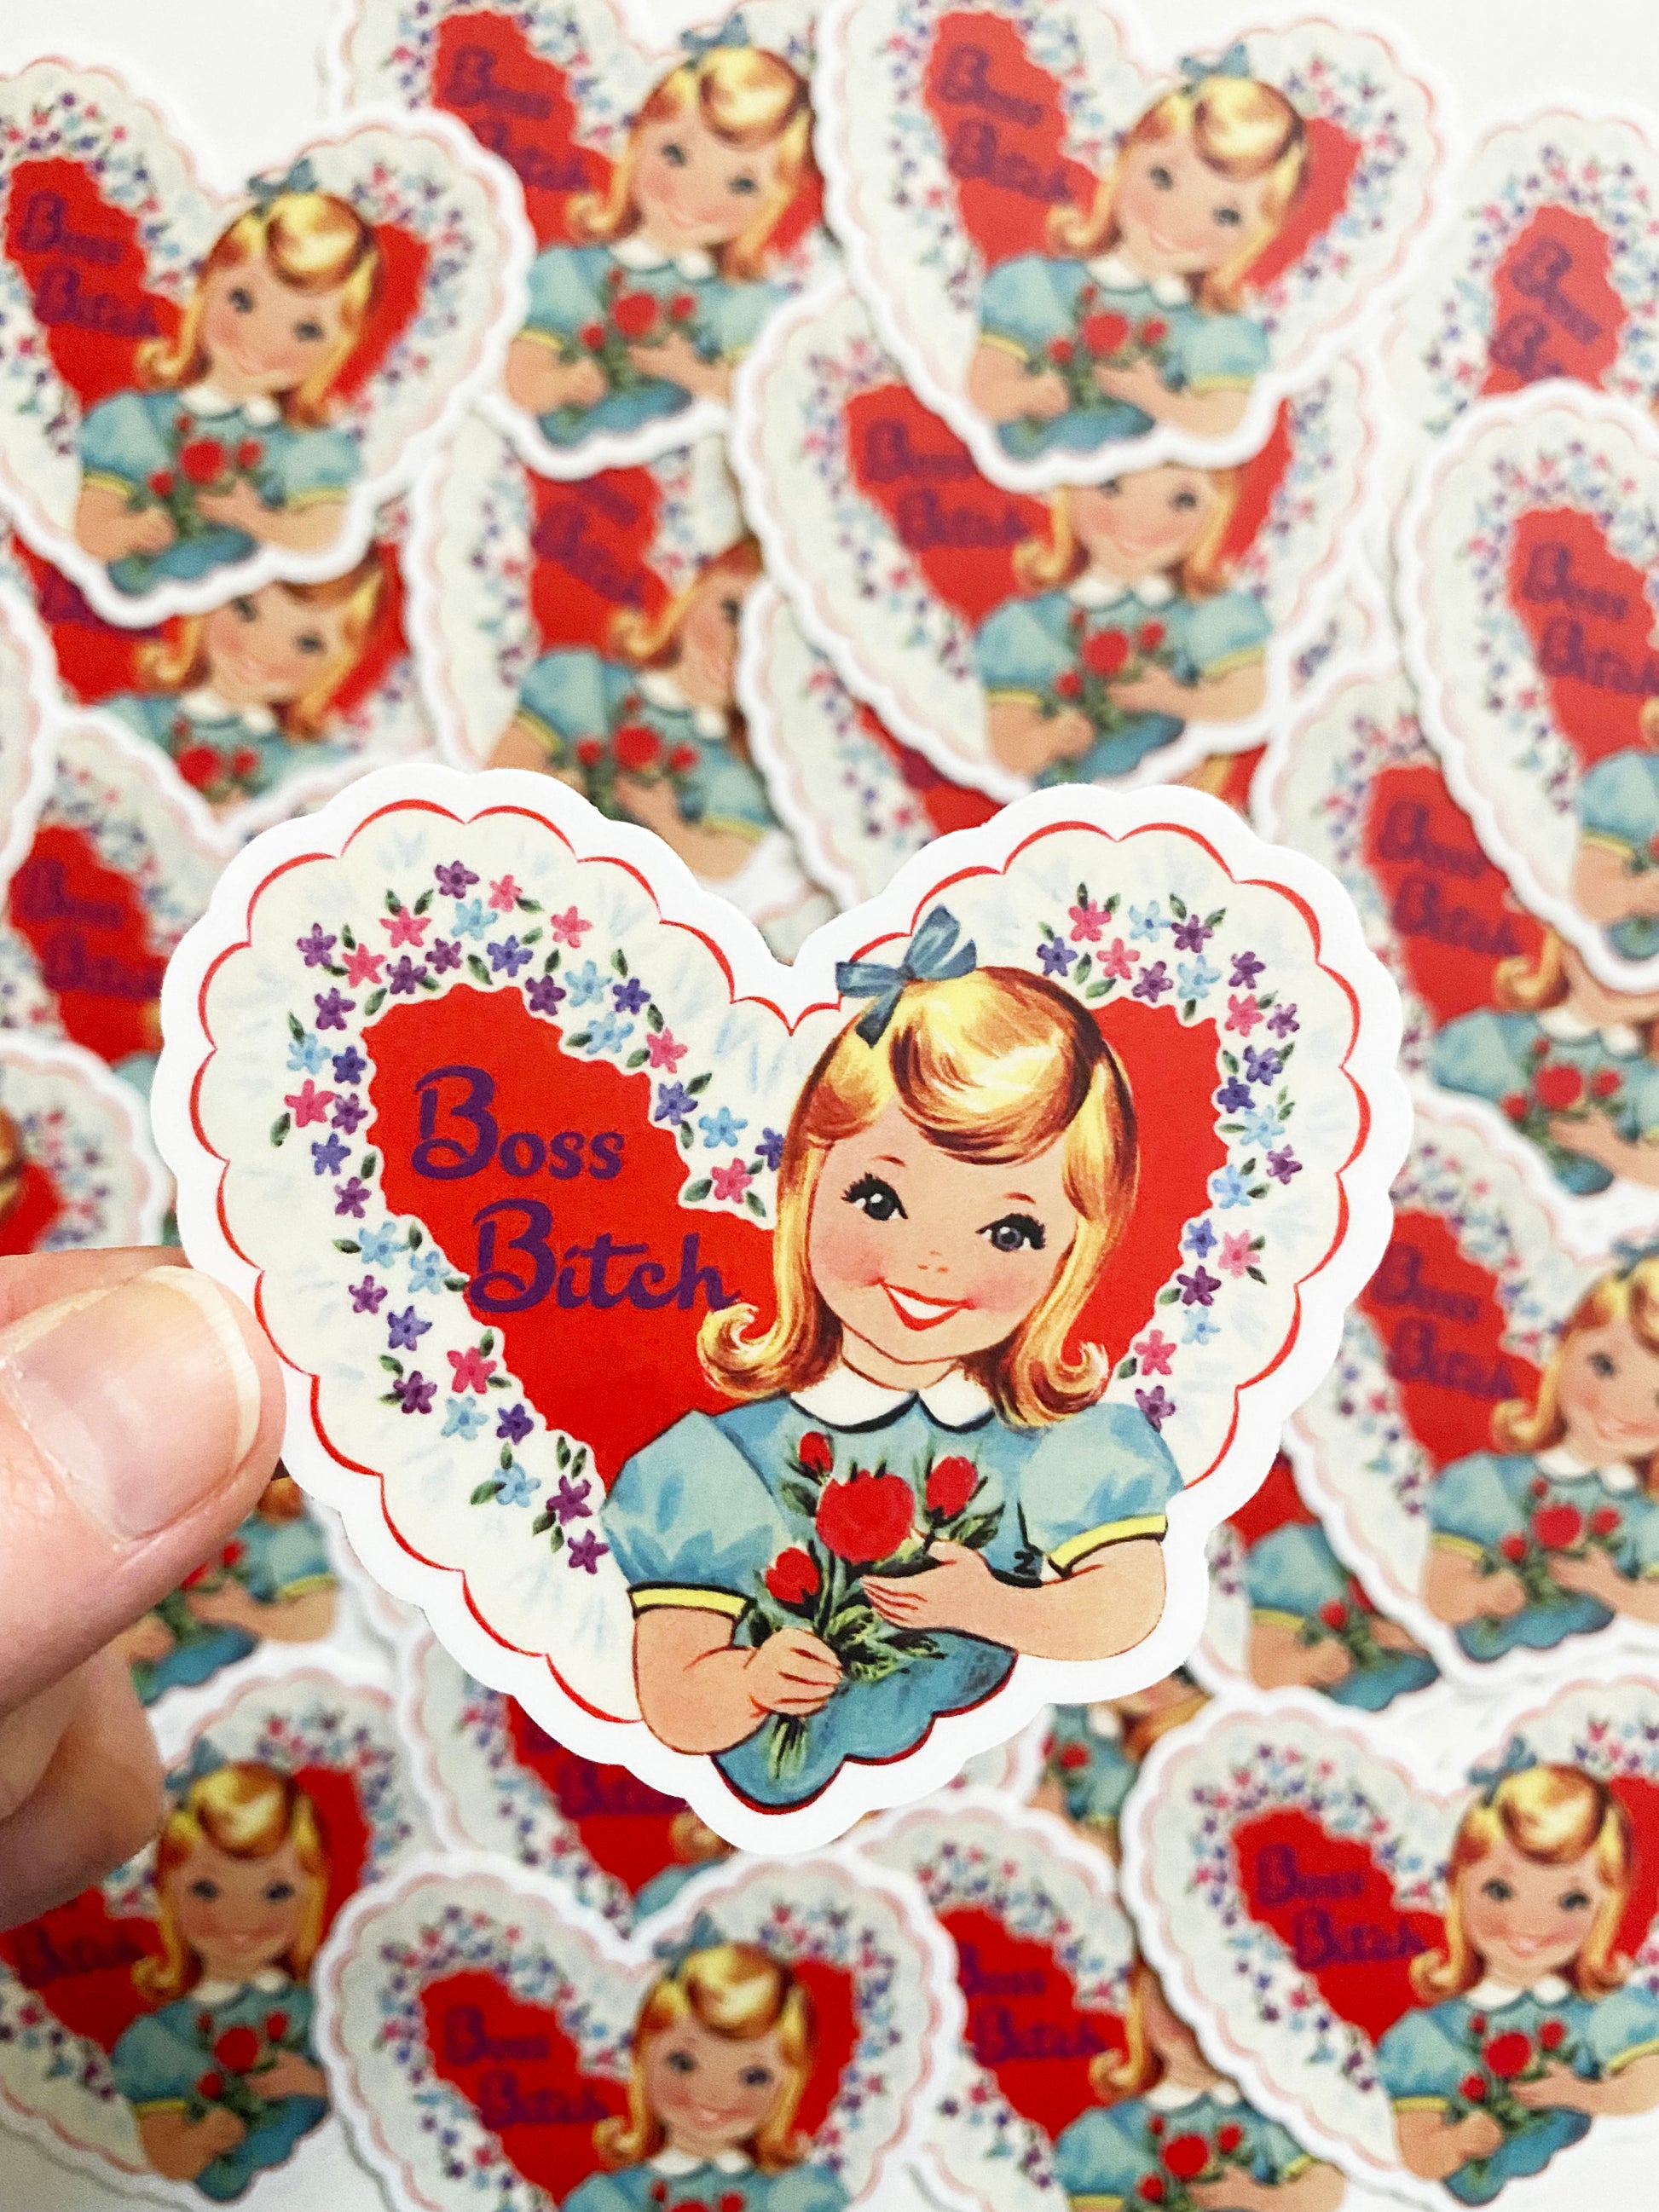 funny vintage valentine style sticker red heart purple pink flowers cute retro style girl smiling with funny text boss bitch coin laundry fun sticker